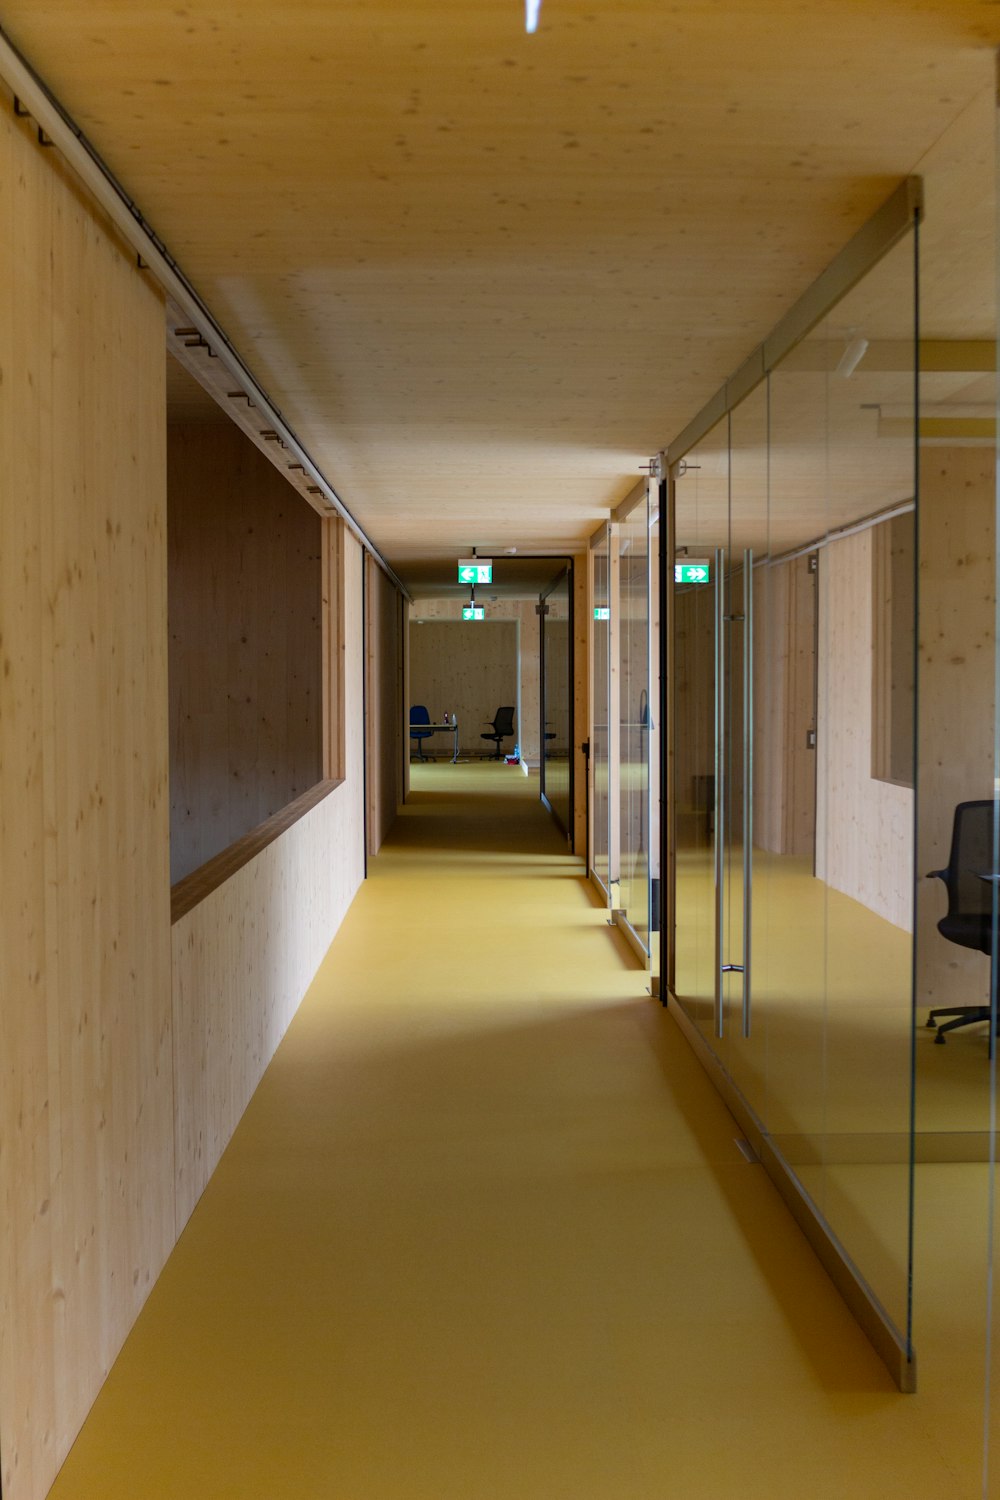 a long hallway with glass walls and a yellow floor